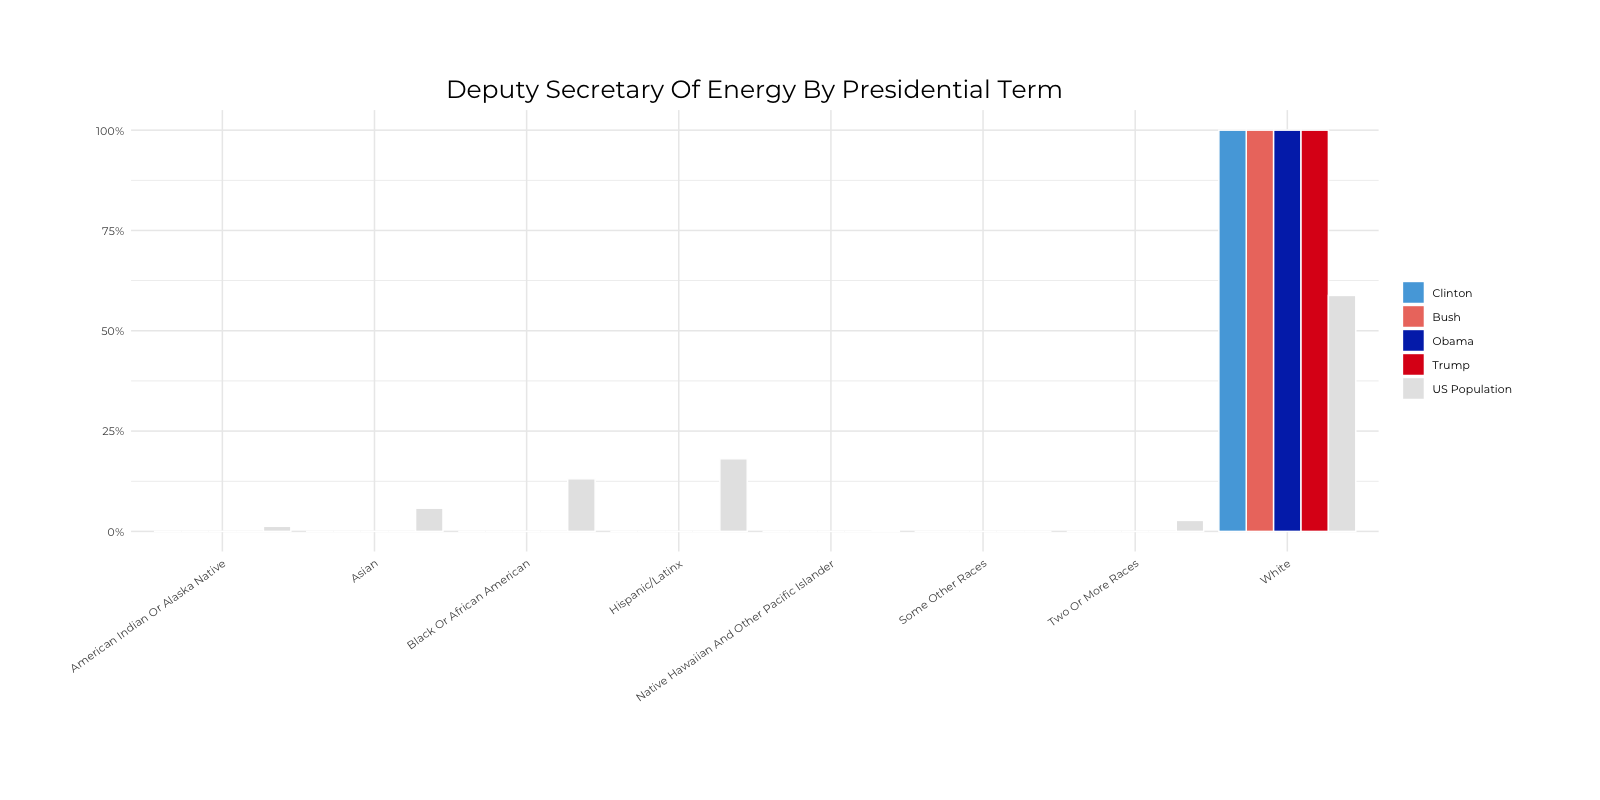 Graph about Racial Composition Comparison of Deputy Secretary of Energy by Presidential Terms. More detailed text description below.